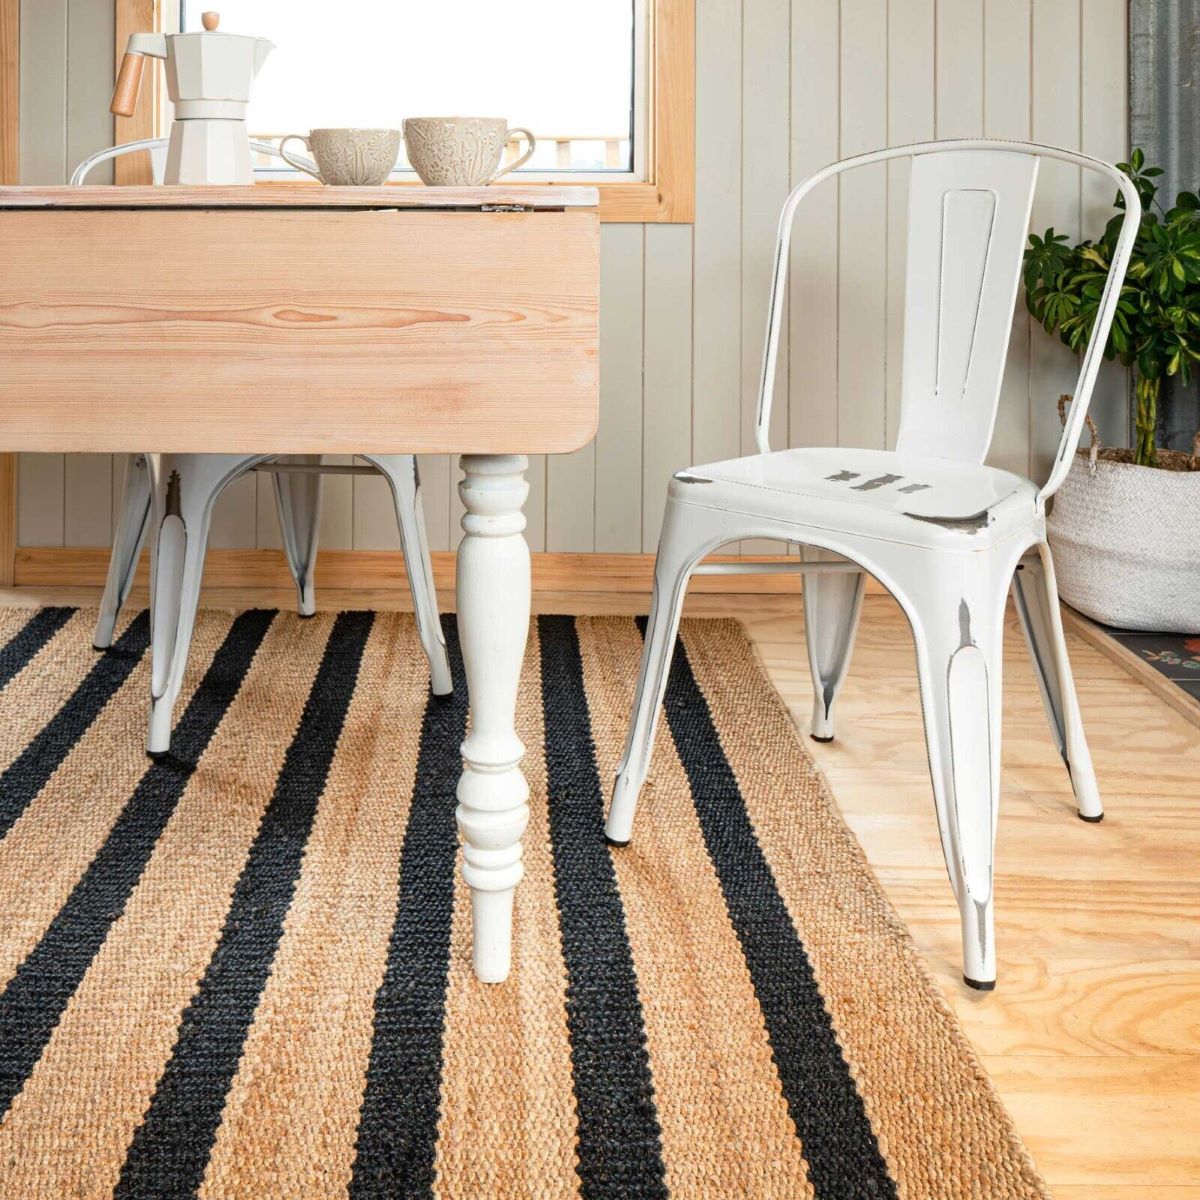 How To Strip Rugs